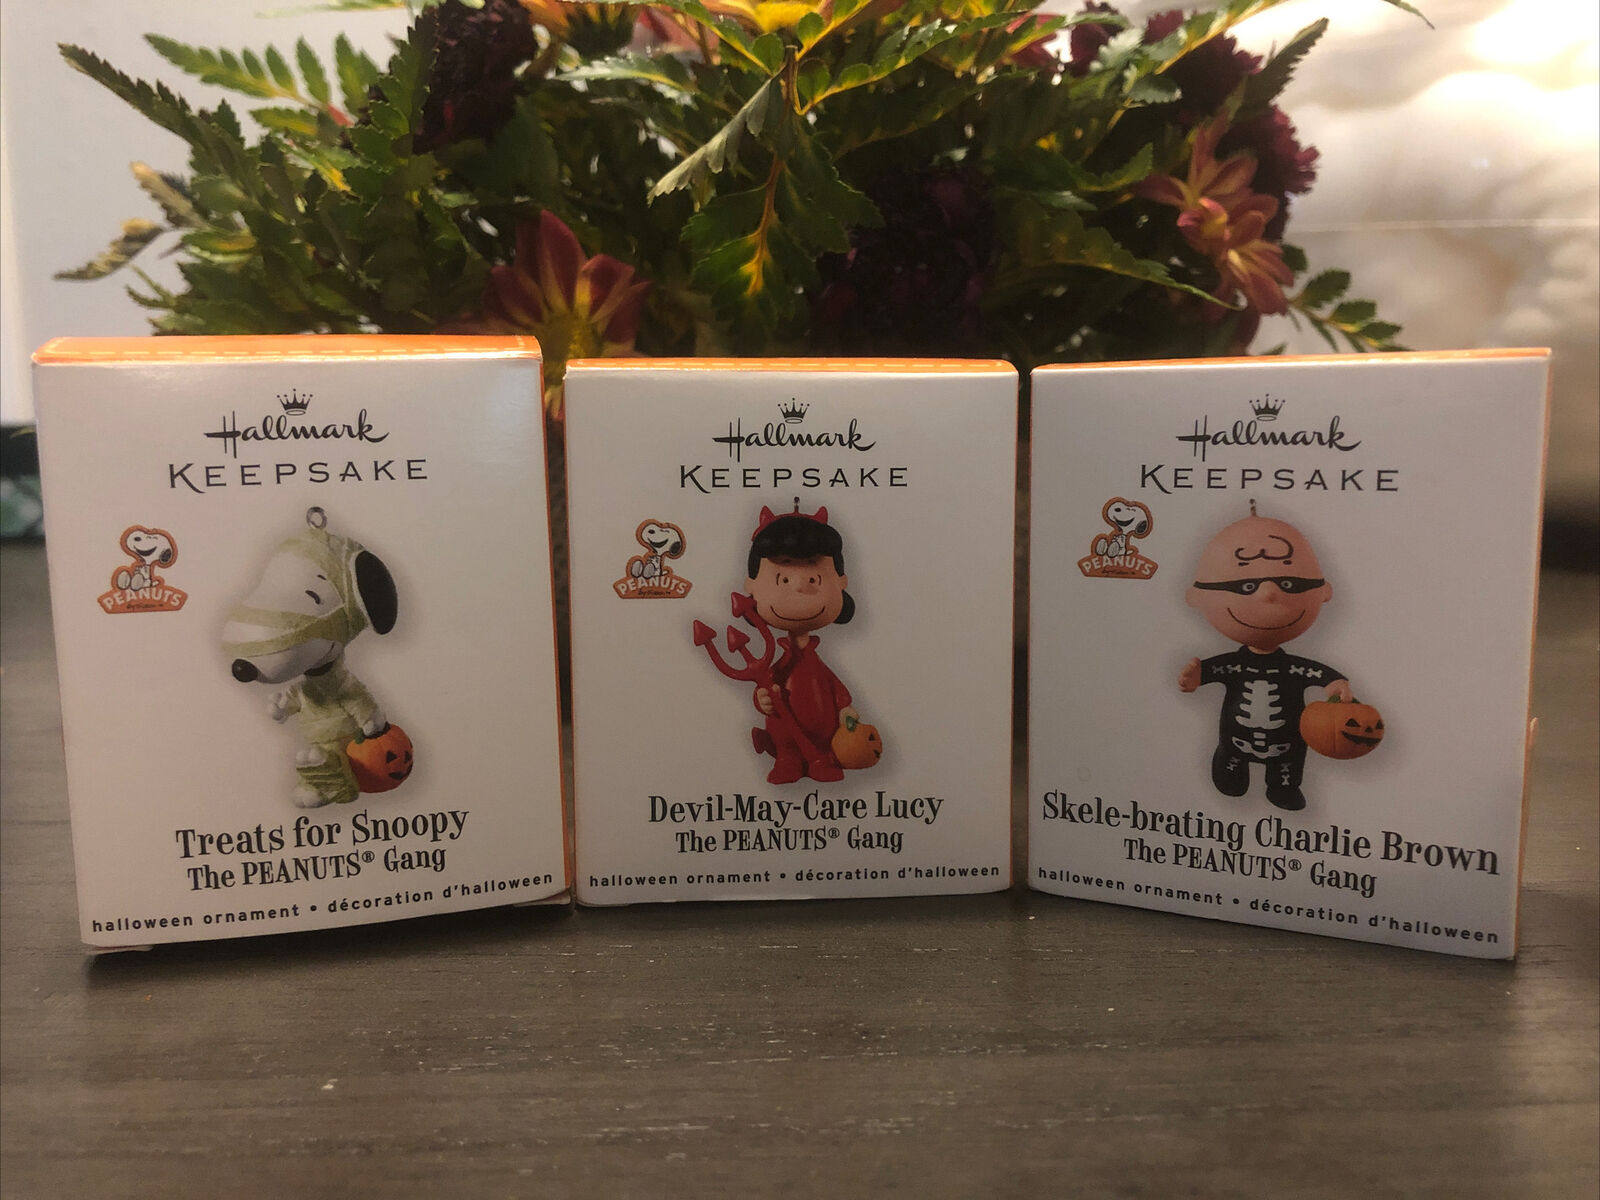 3 New 2010 Hallmark Halloween PEANUTS GANG ornaments Snoopy, Lucy, Charlie Brown